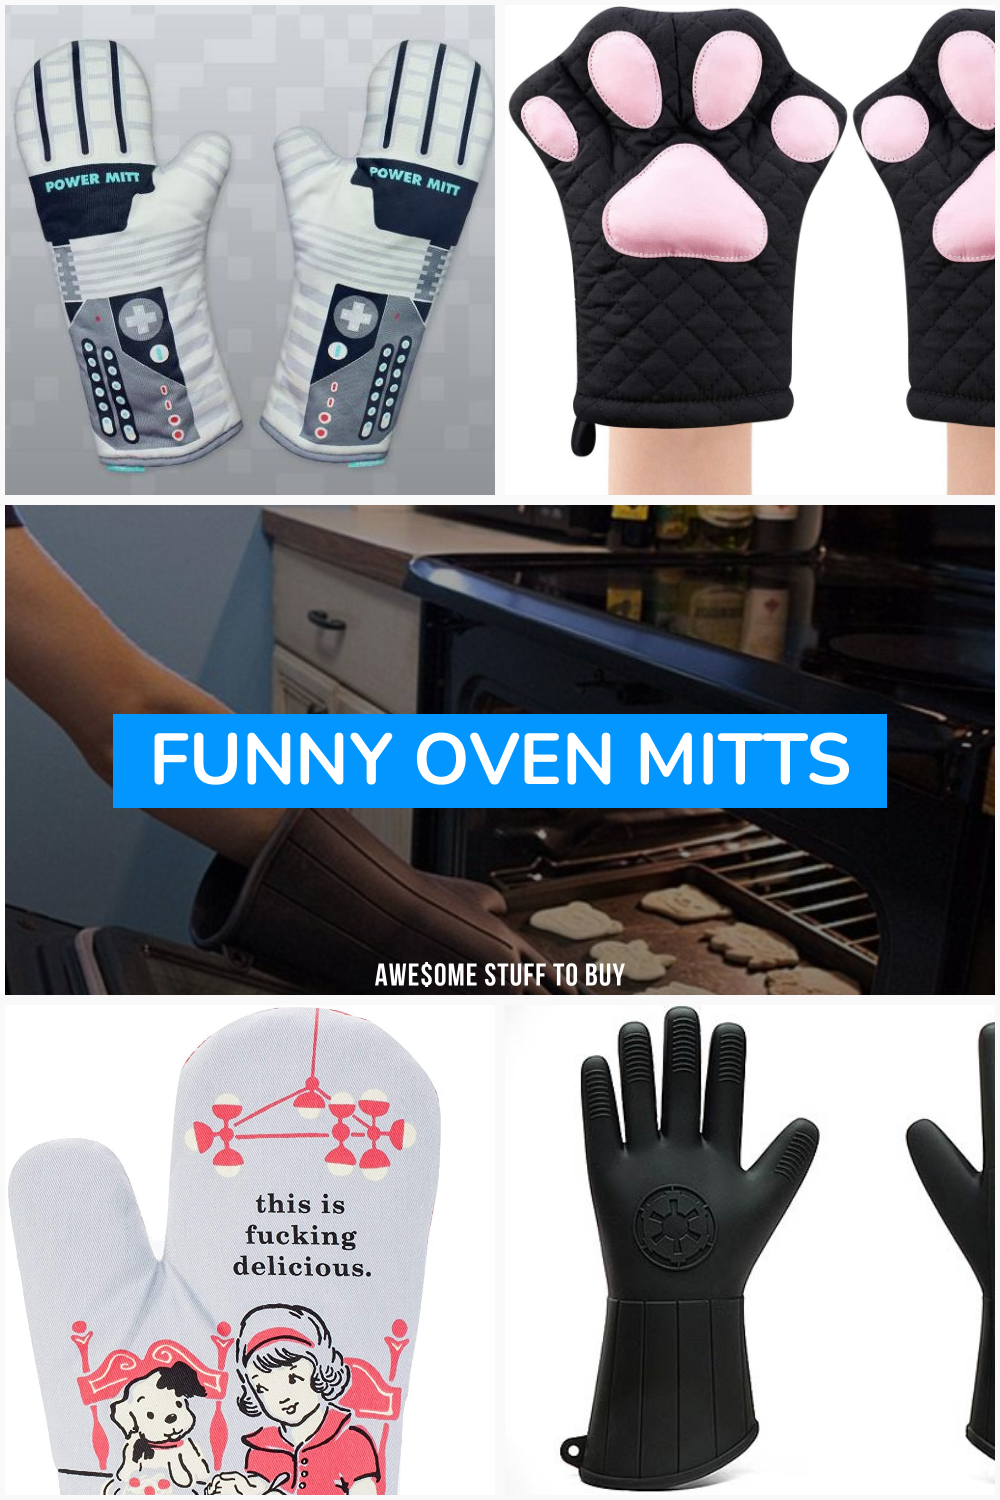 Funny Oven Mitts // Awesome Stuff to Buy